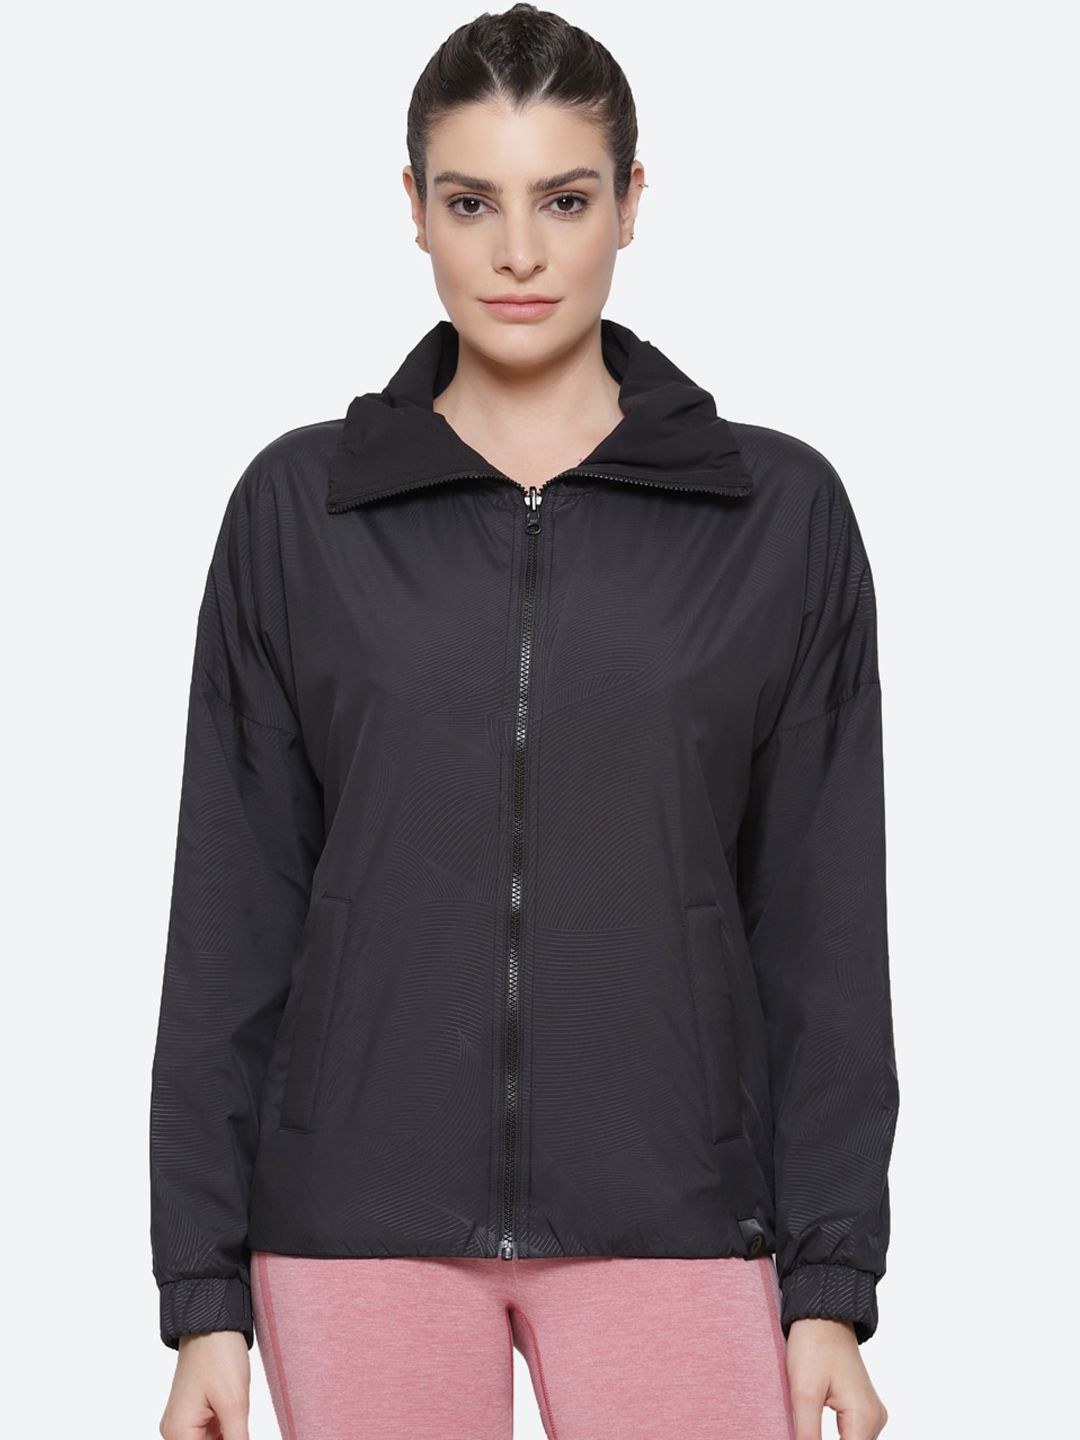 ASICS Women Black Water Resistant Longline Reversible Training or Gym Sporty Jacket Price in India